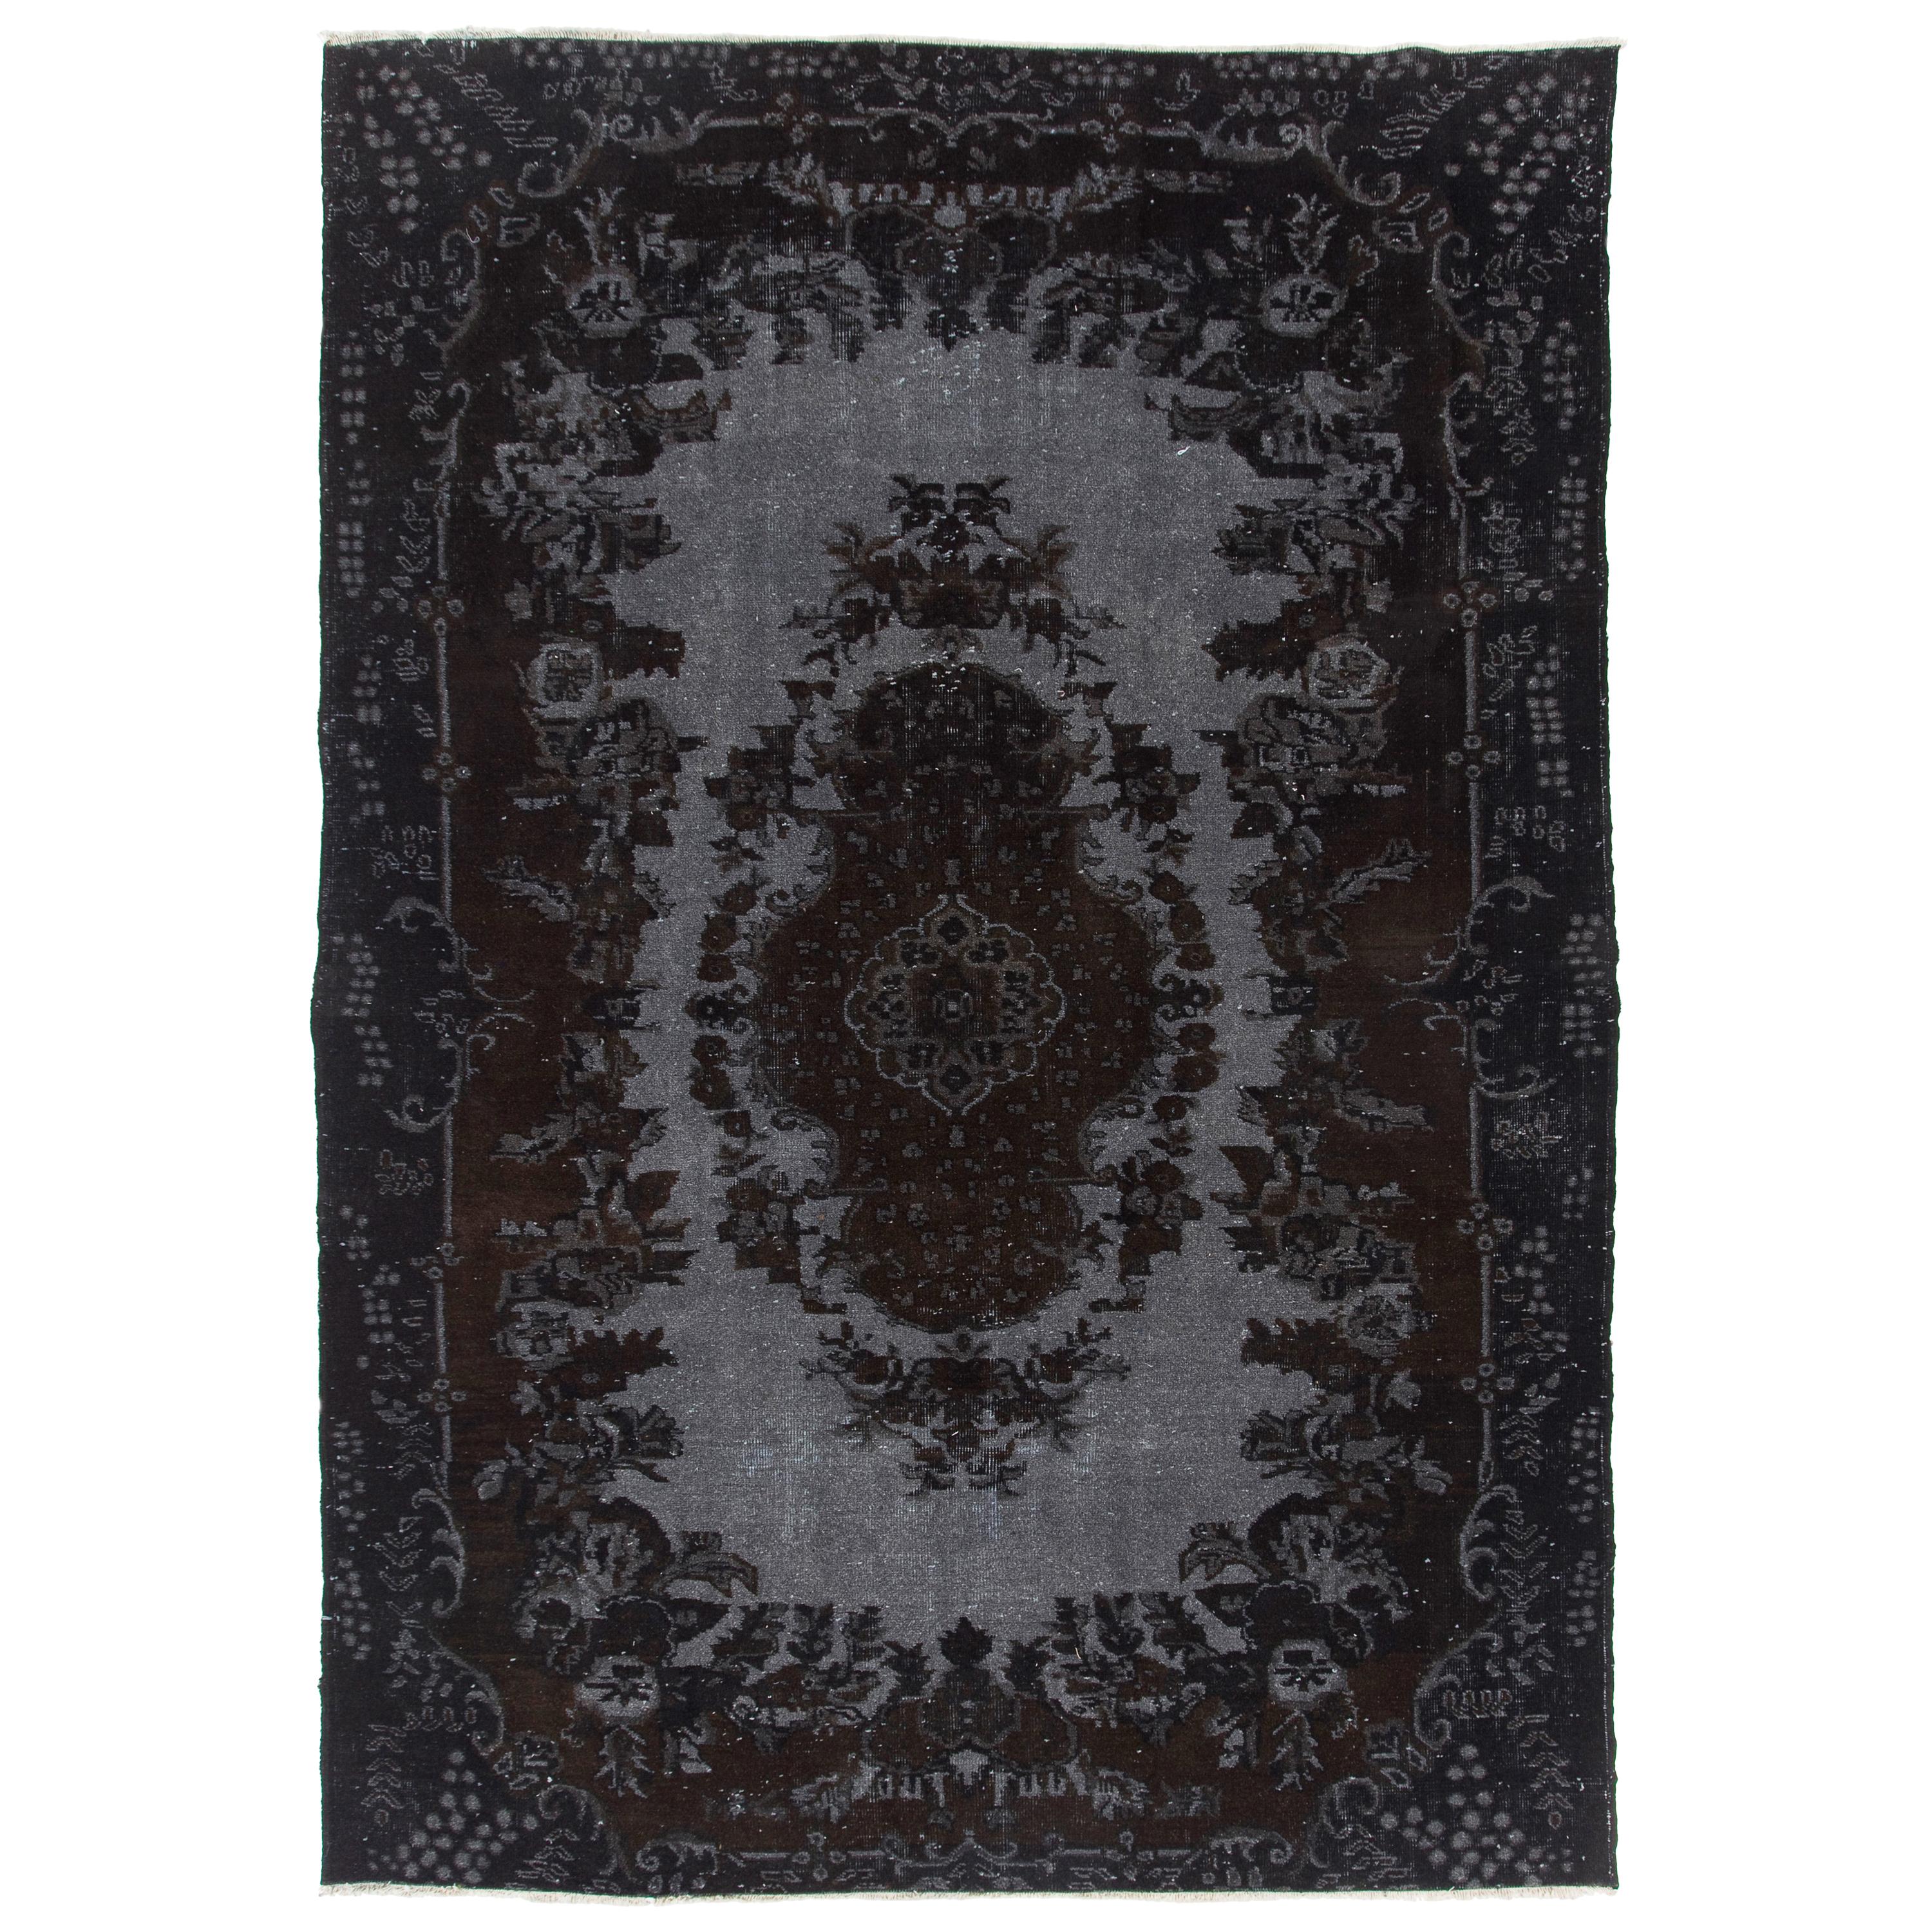 6.7x9.7 Ft Black Over-Dyed Handmade Vintage Turkish Rug with High and Low Pile